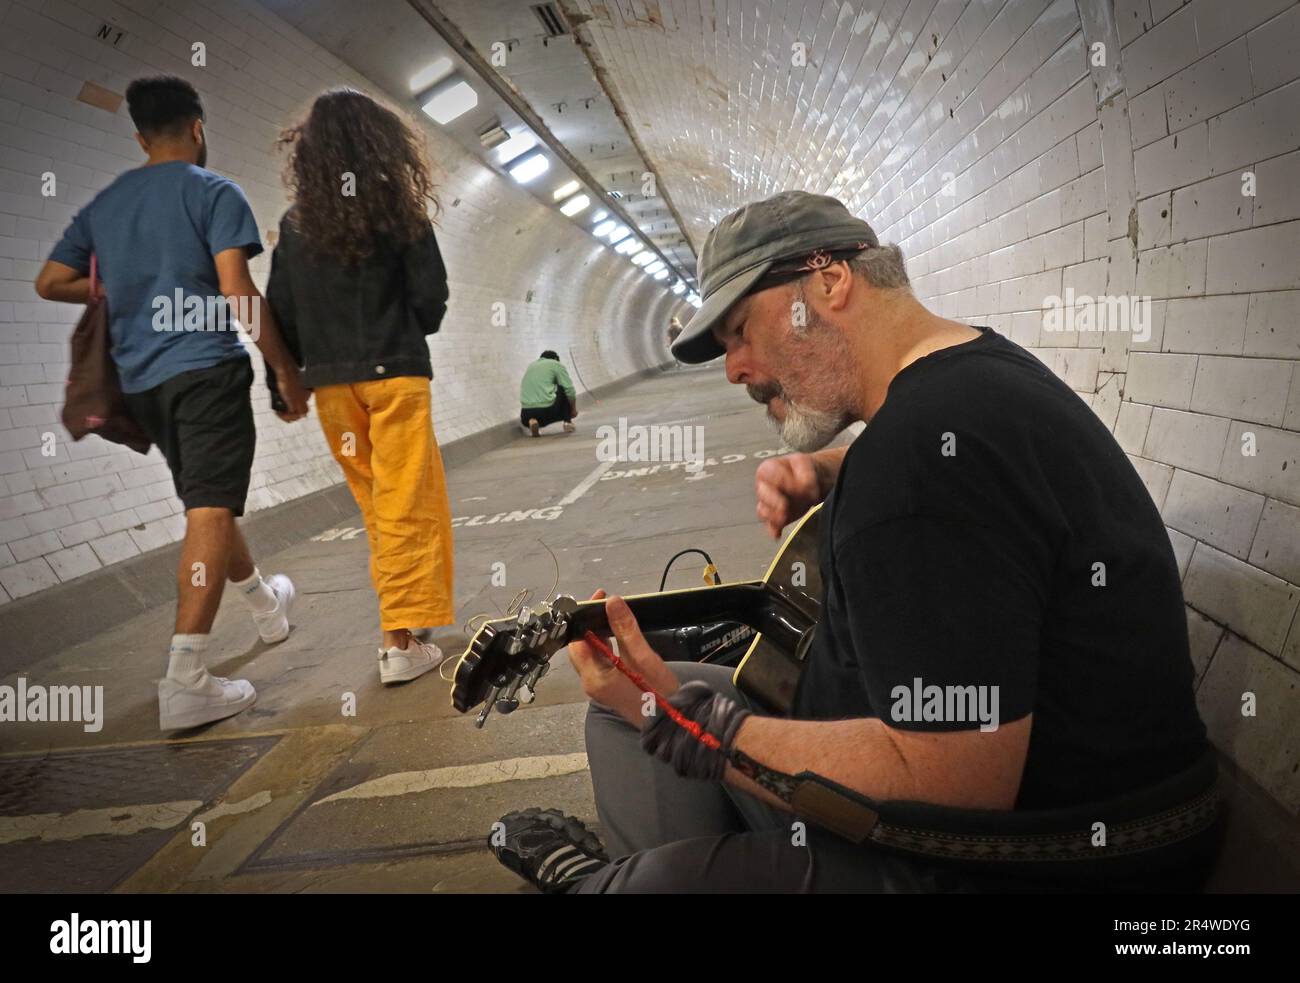 Busker in the Greenwich Thames foot tunnel, entertaining walkers going from Greenwich to the Isle Of Dogs, east London, England, UK, SE10 9HT Stock Photo